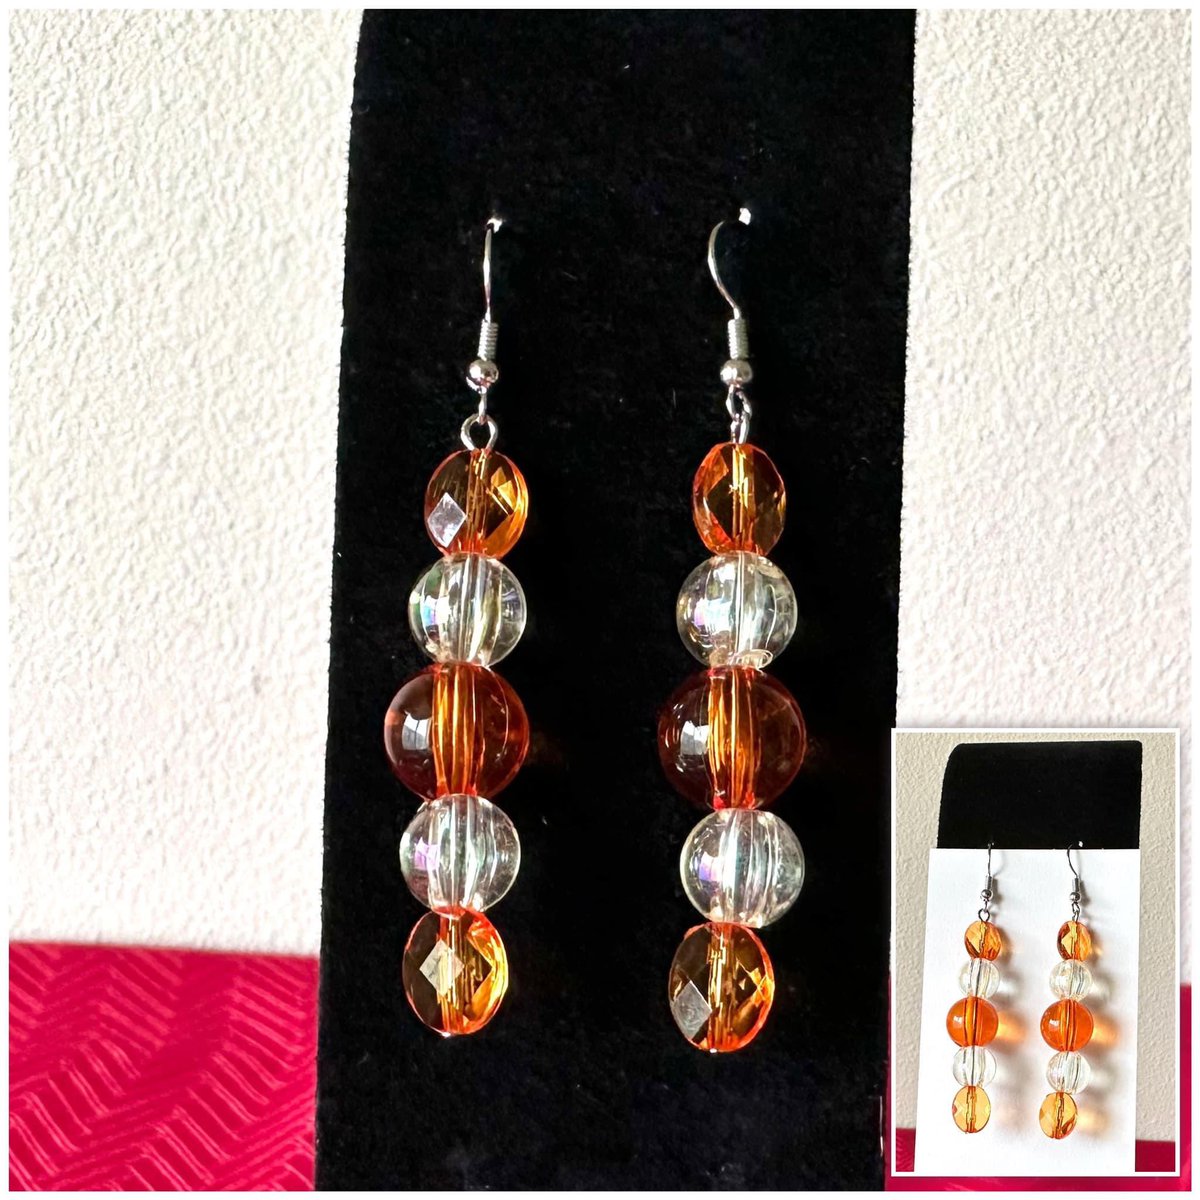 Orange Pop Earrings
(Lighting can affect the way these earrings look)

Buy a pair in my Square shop:
justaskcassie.square.site/product/orange…

#orange #earrings #jewelry #orangeearrings #orangejewelry #handmade #uniquegifts #uniquejewelry #uniqueearrings #unique